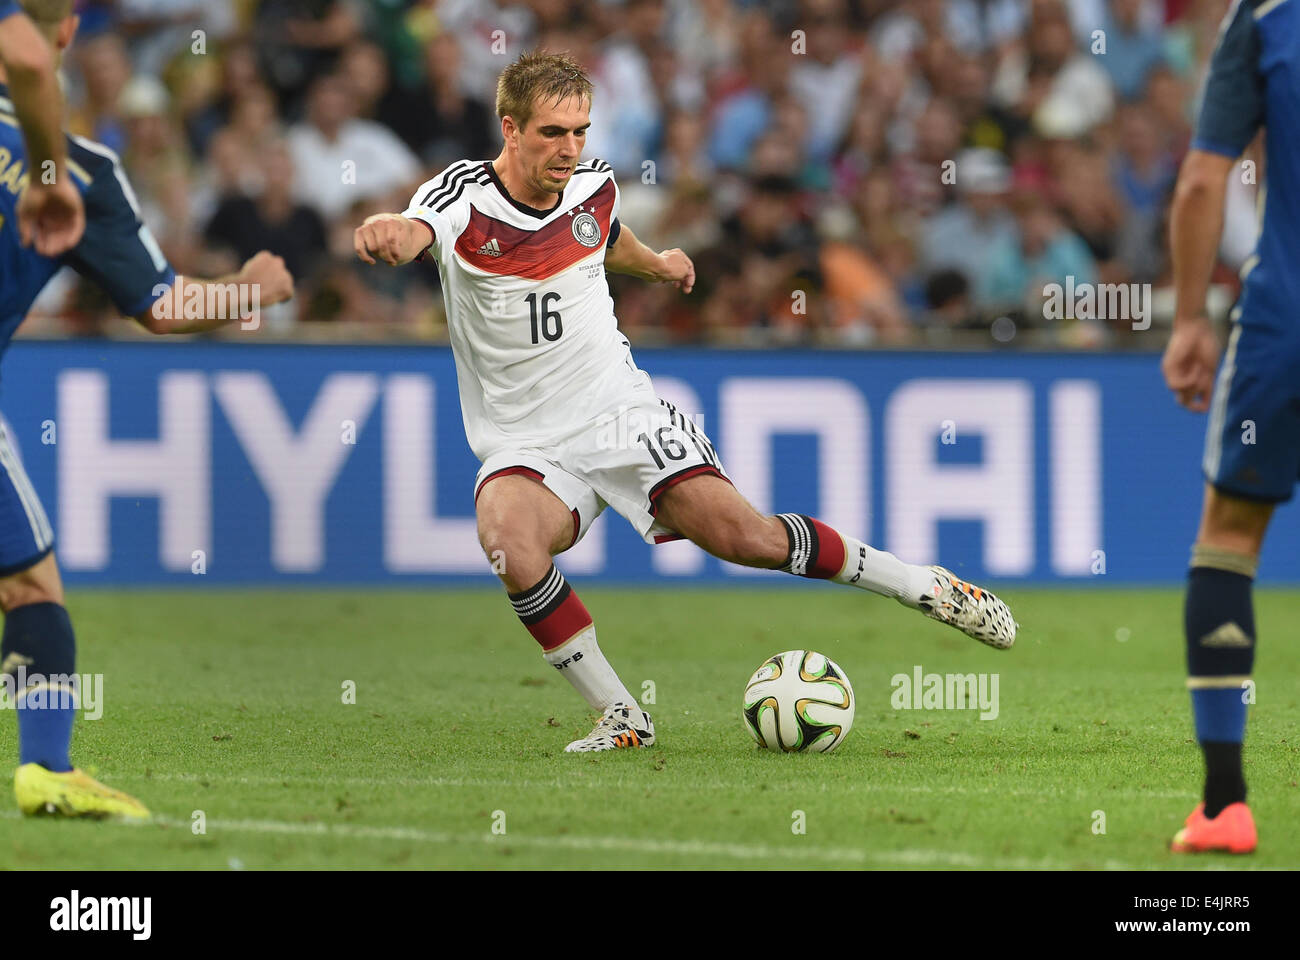 Rio de Janeiro, Brazil. 13th July, 2014. Philipp Lahm of Germany in action during the FIFA World Cup 2014 final soccer match between Germany and Argentina at the Estadio do Maracana in Rio de Janeiro, Brazil, 13 July 2014. Photo: Andreas Gebert/dpa/Alamy Live News Stock Photo